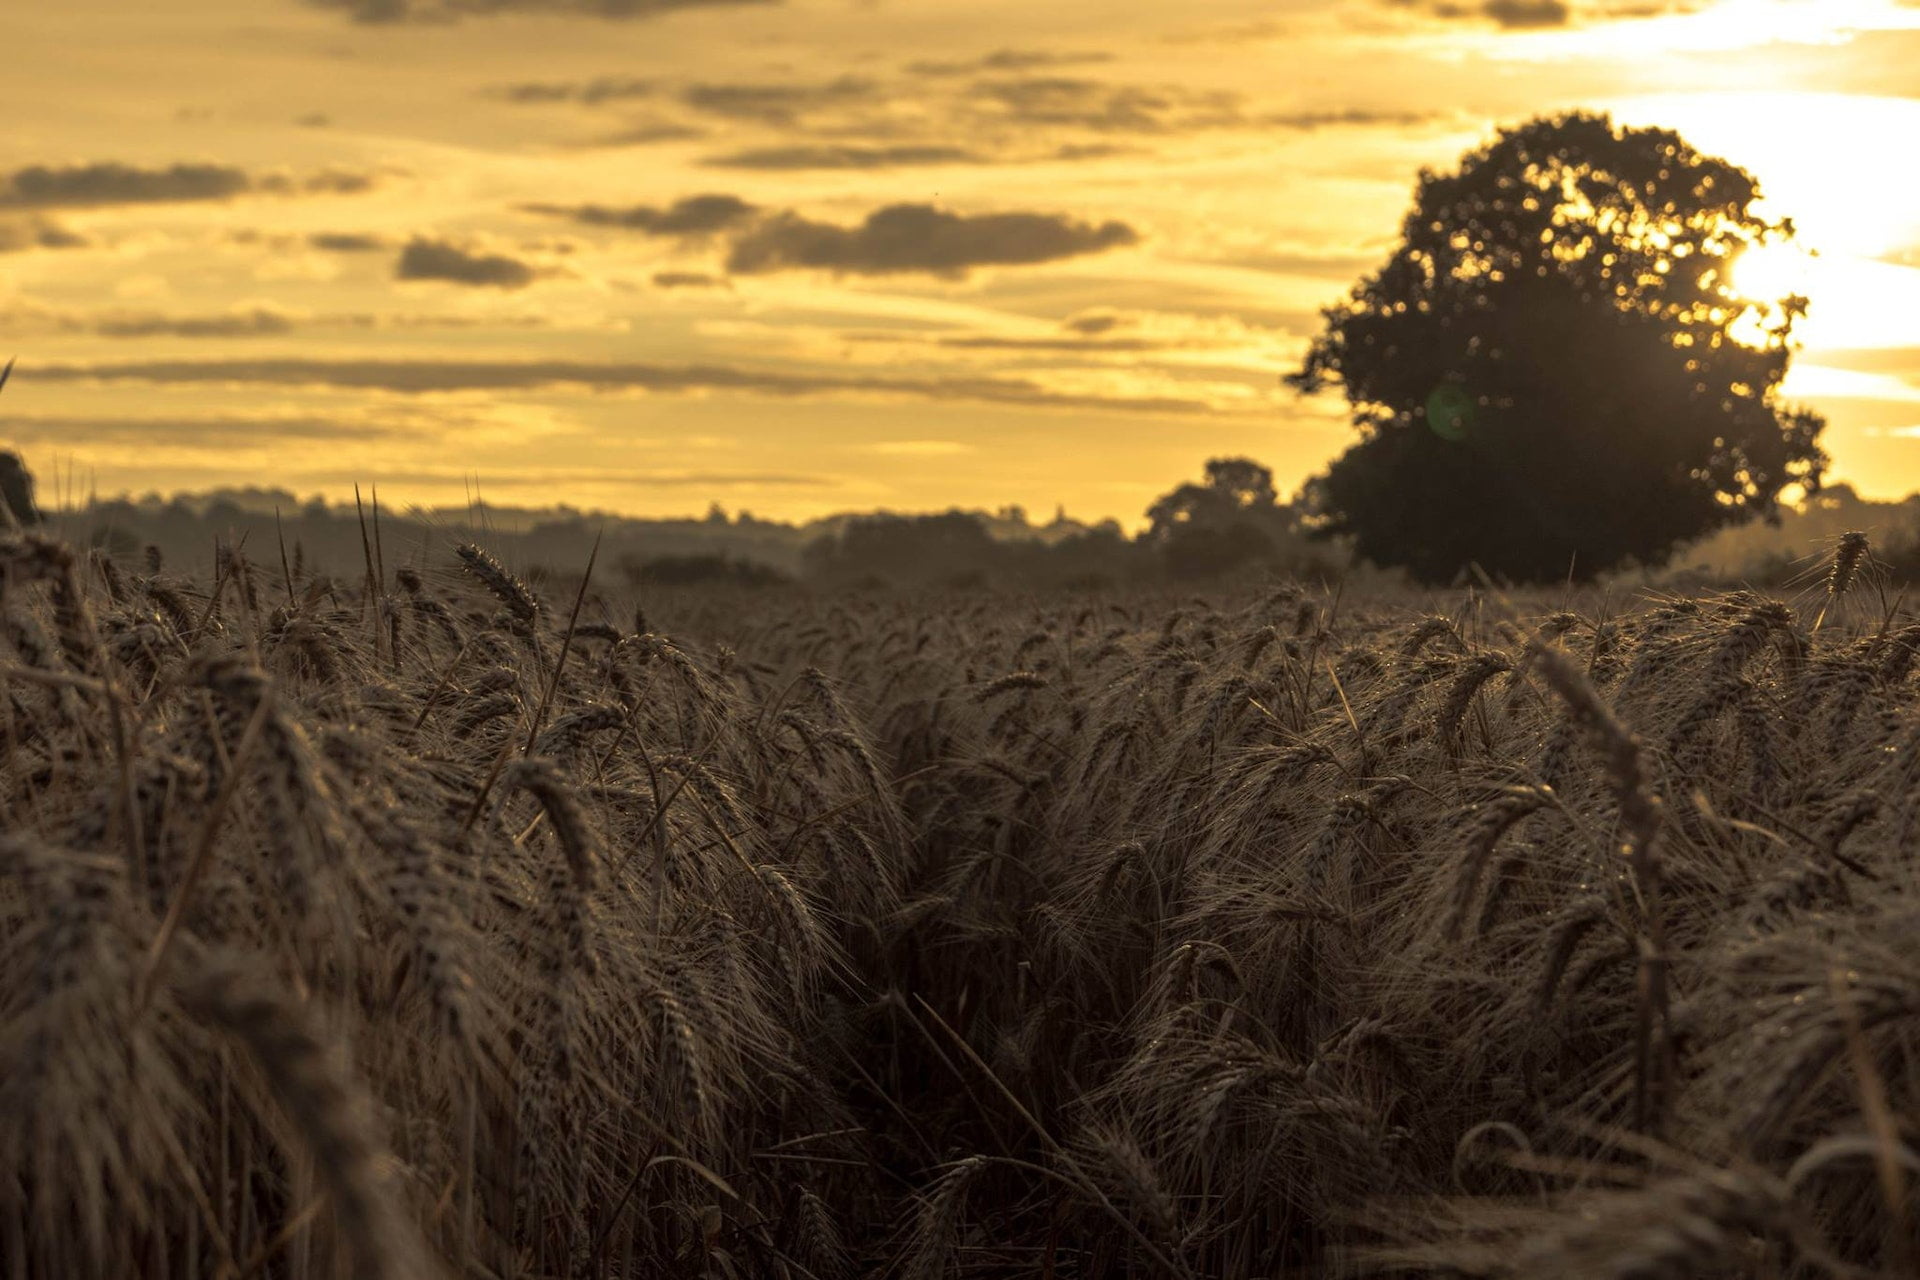 West Sussex (a wheat field at sunset)